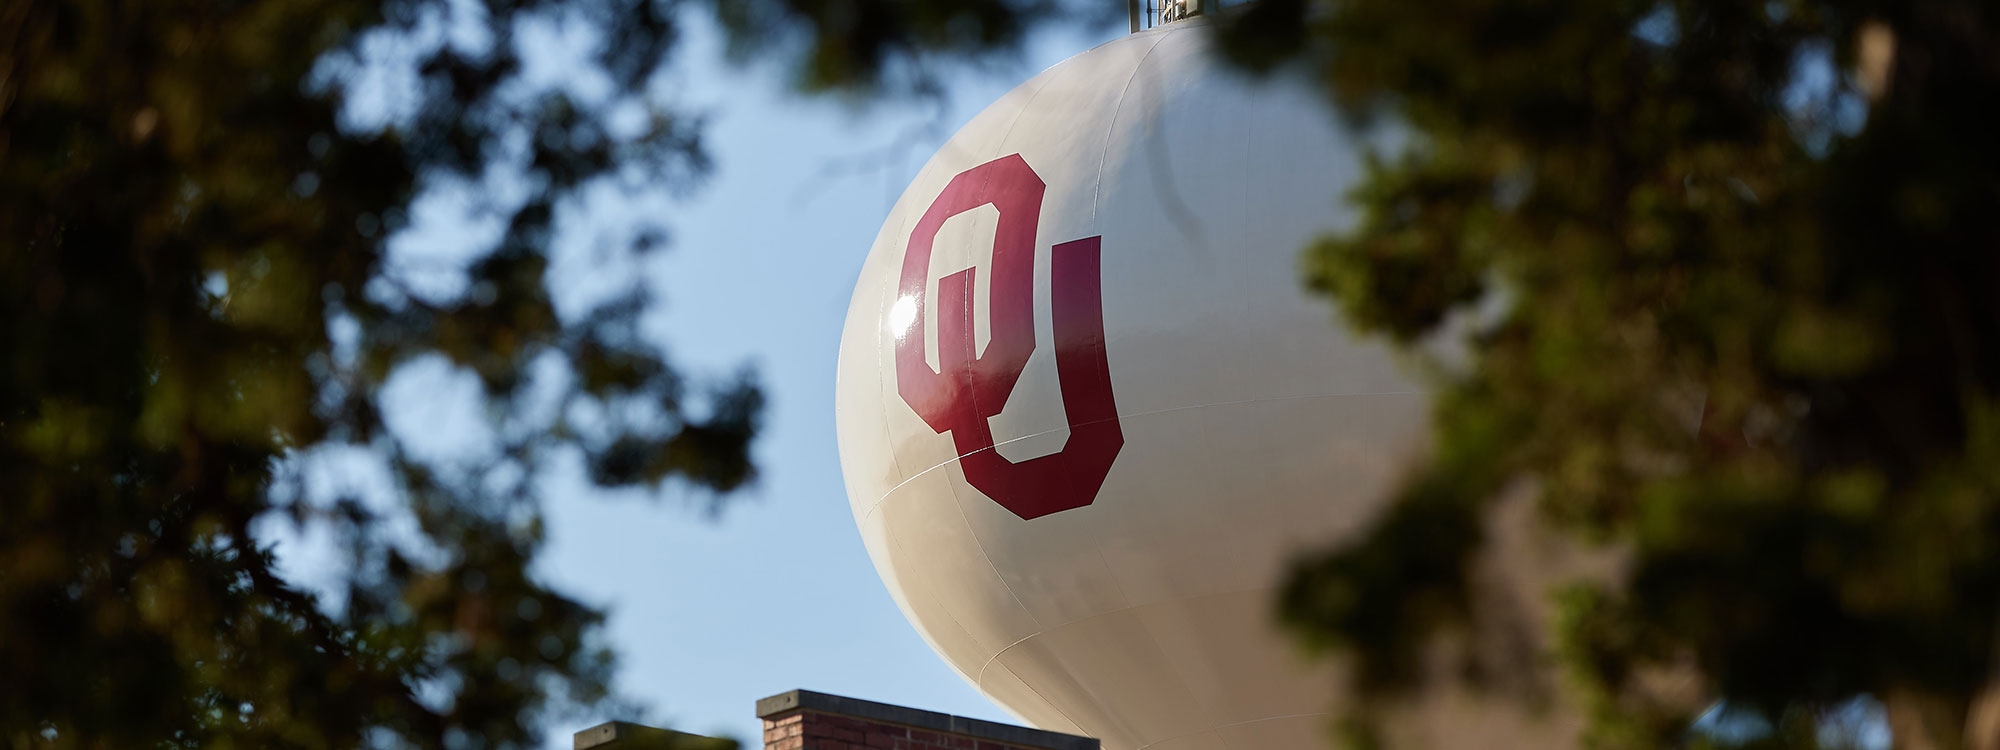 The OU water tower framed by trees and a blue sky.